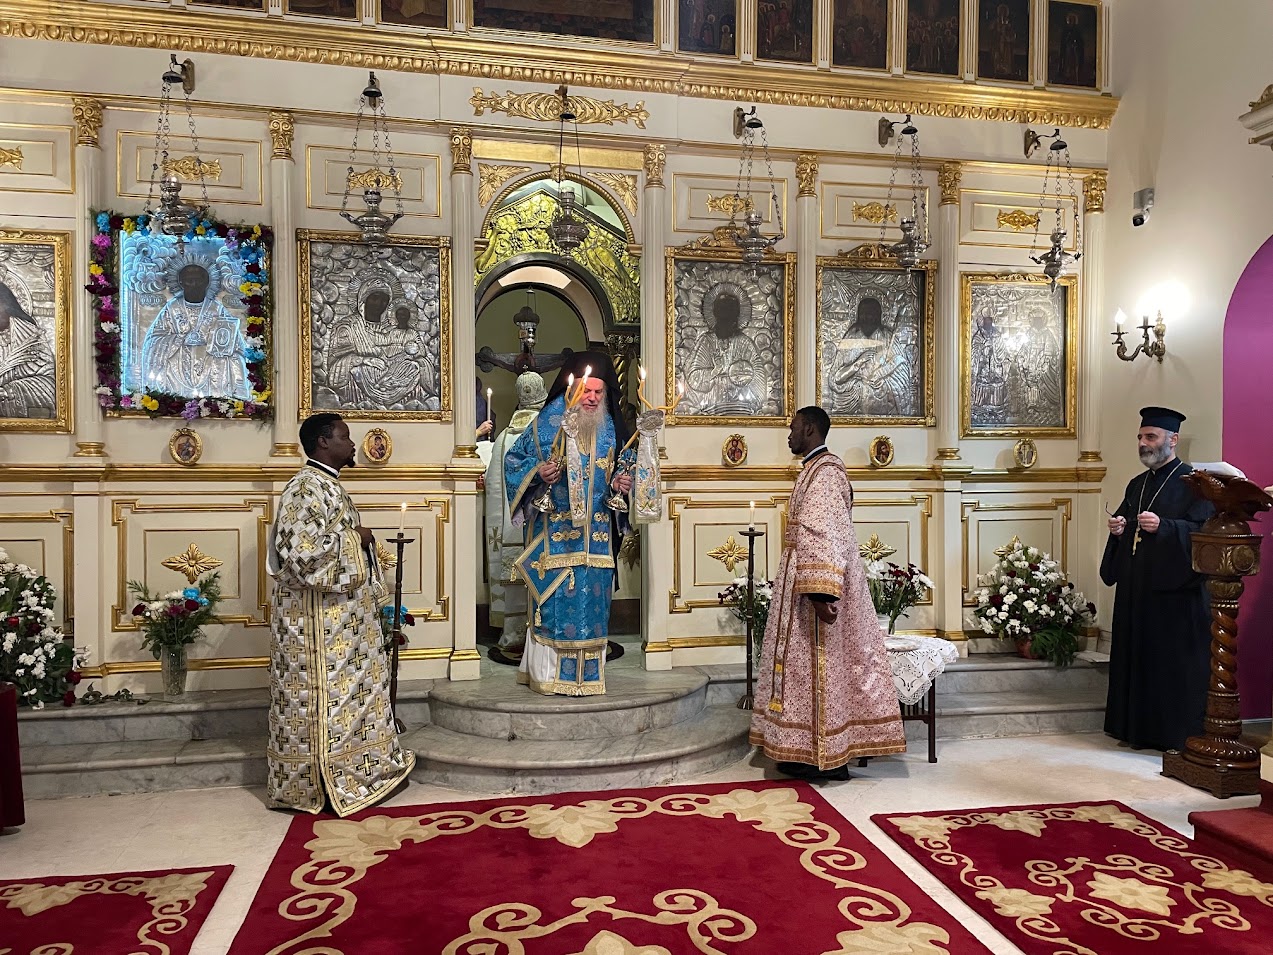 Patriarchal Divine Liturgy was celebrated at the Church of Saint Nicholas in Alexandria